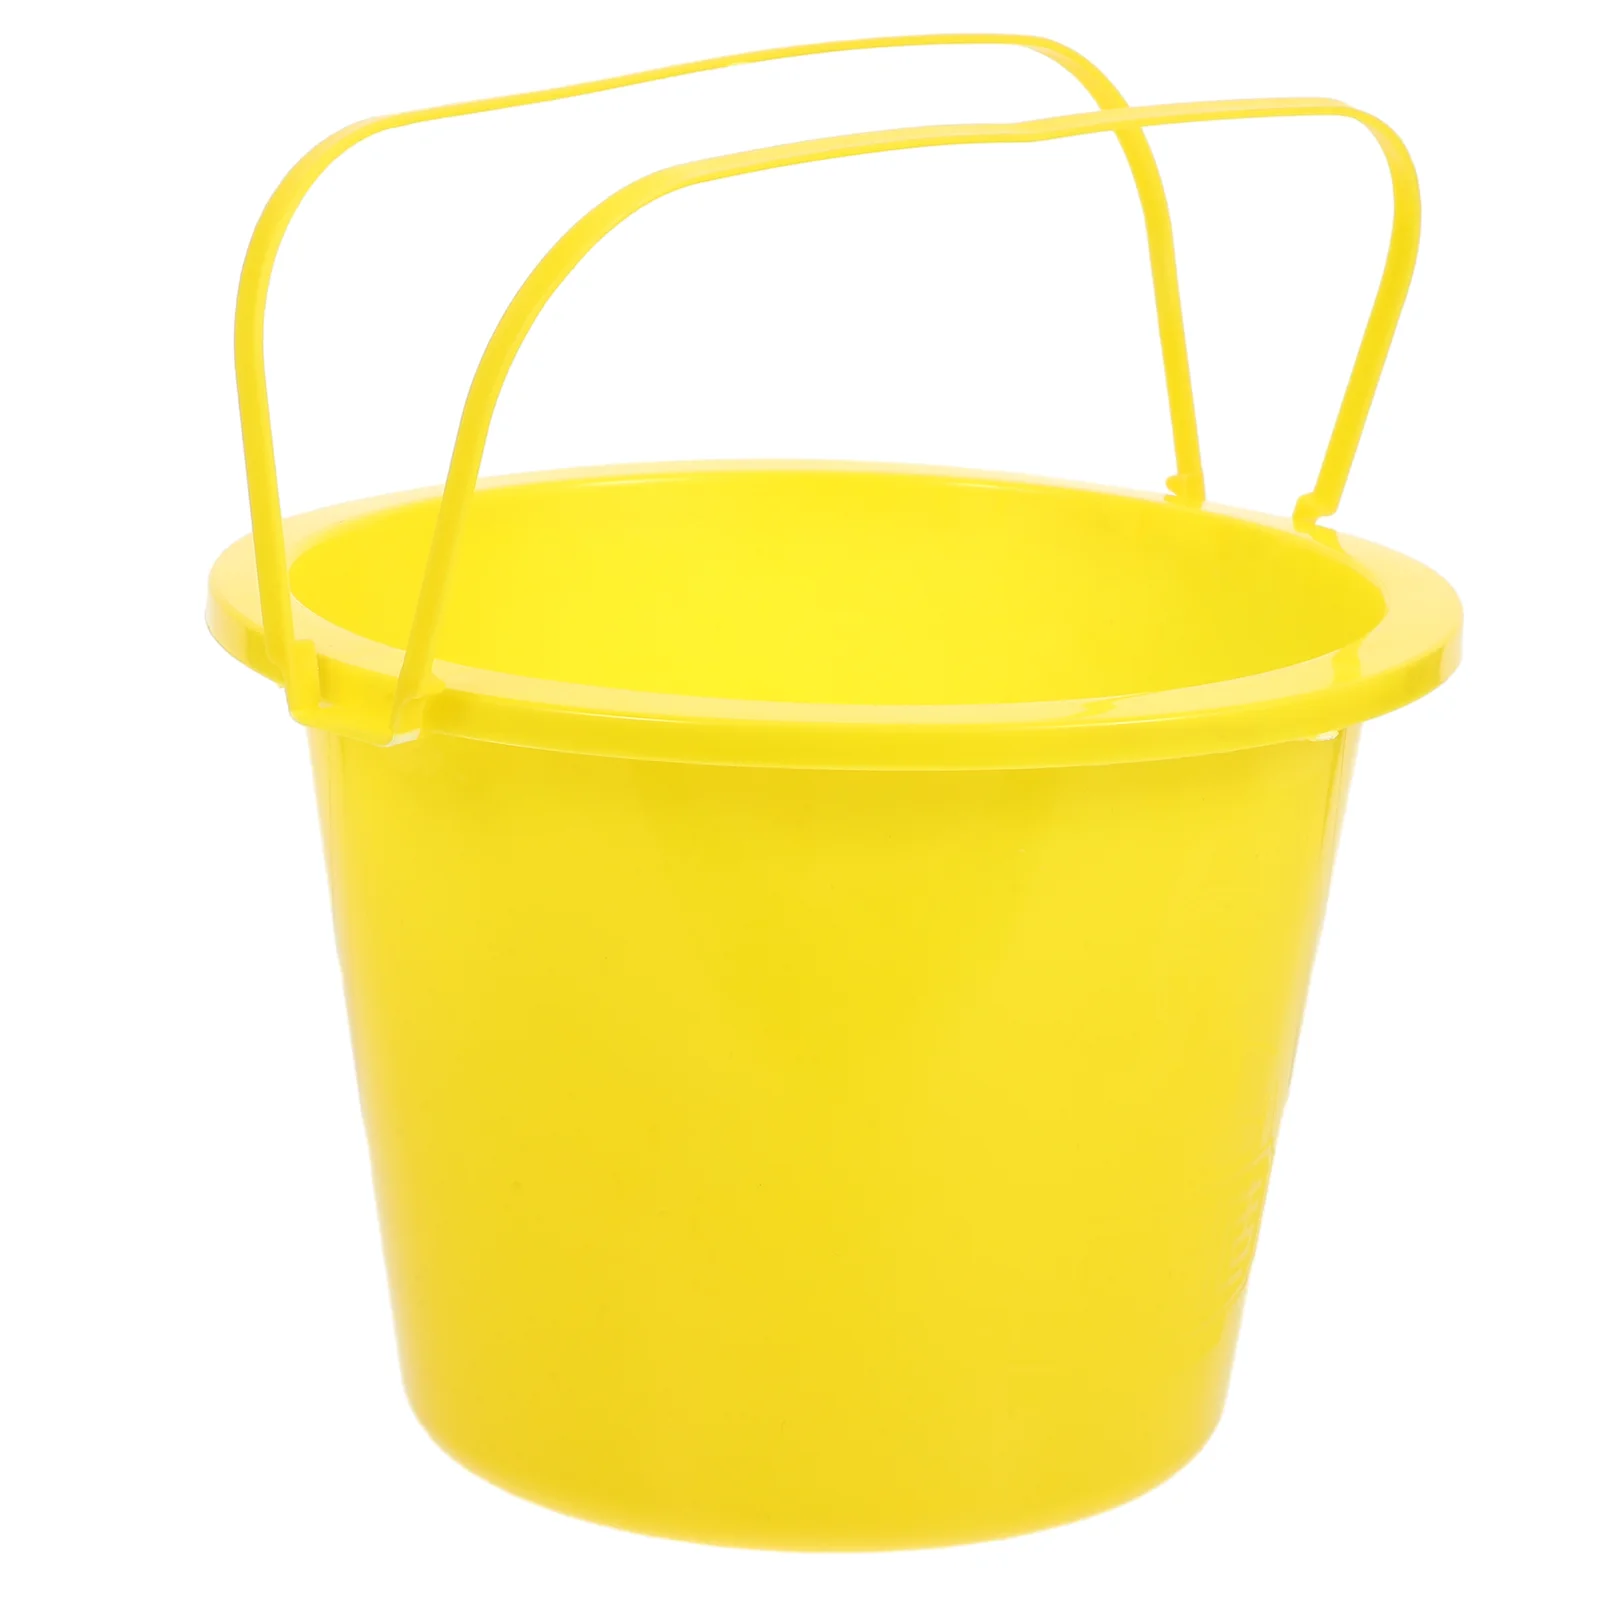 

Empty Paint Bucket Favor Containers Favor Containers Paints Container with Handle Painting Varnish Storage Bucket Portable Paint